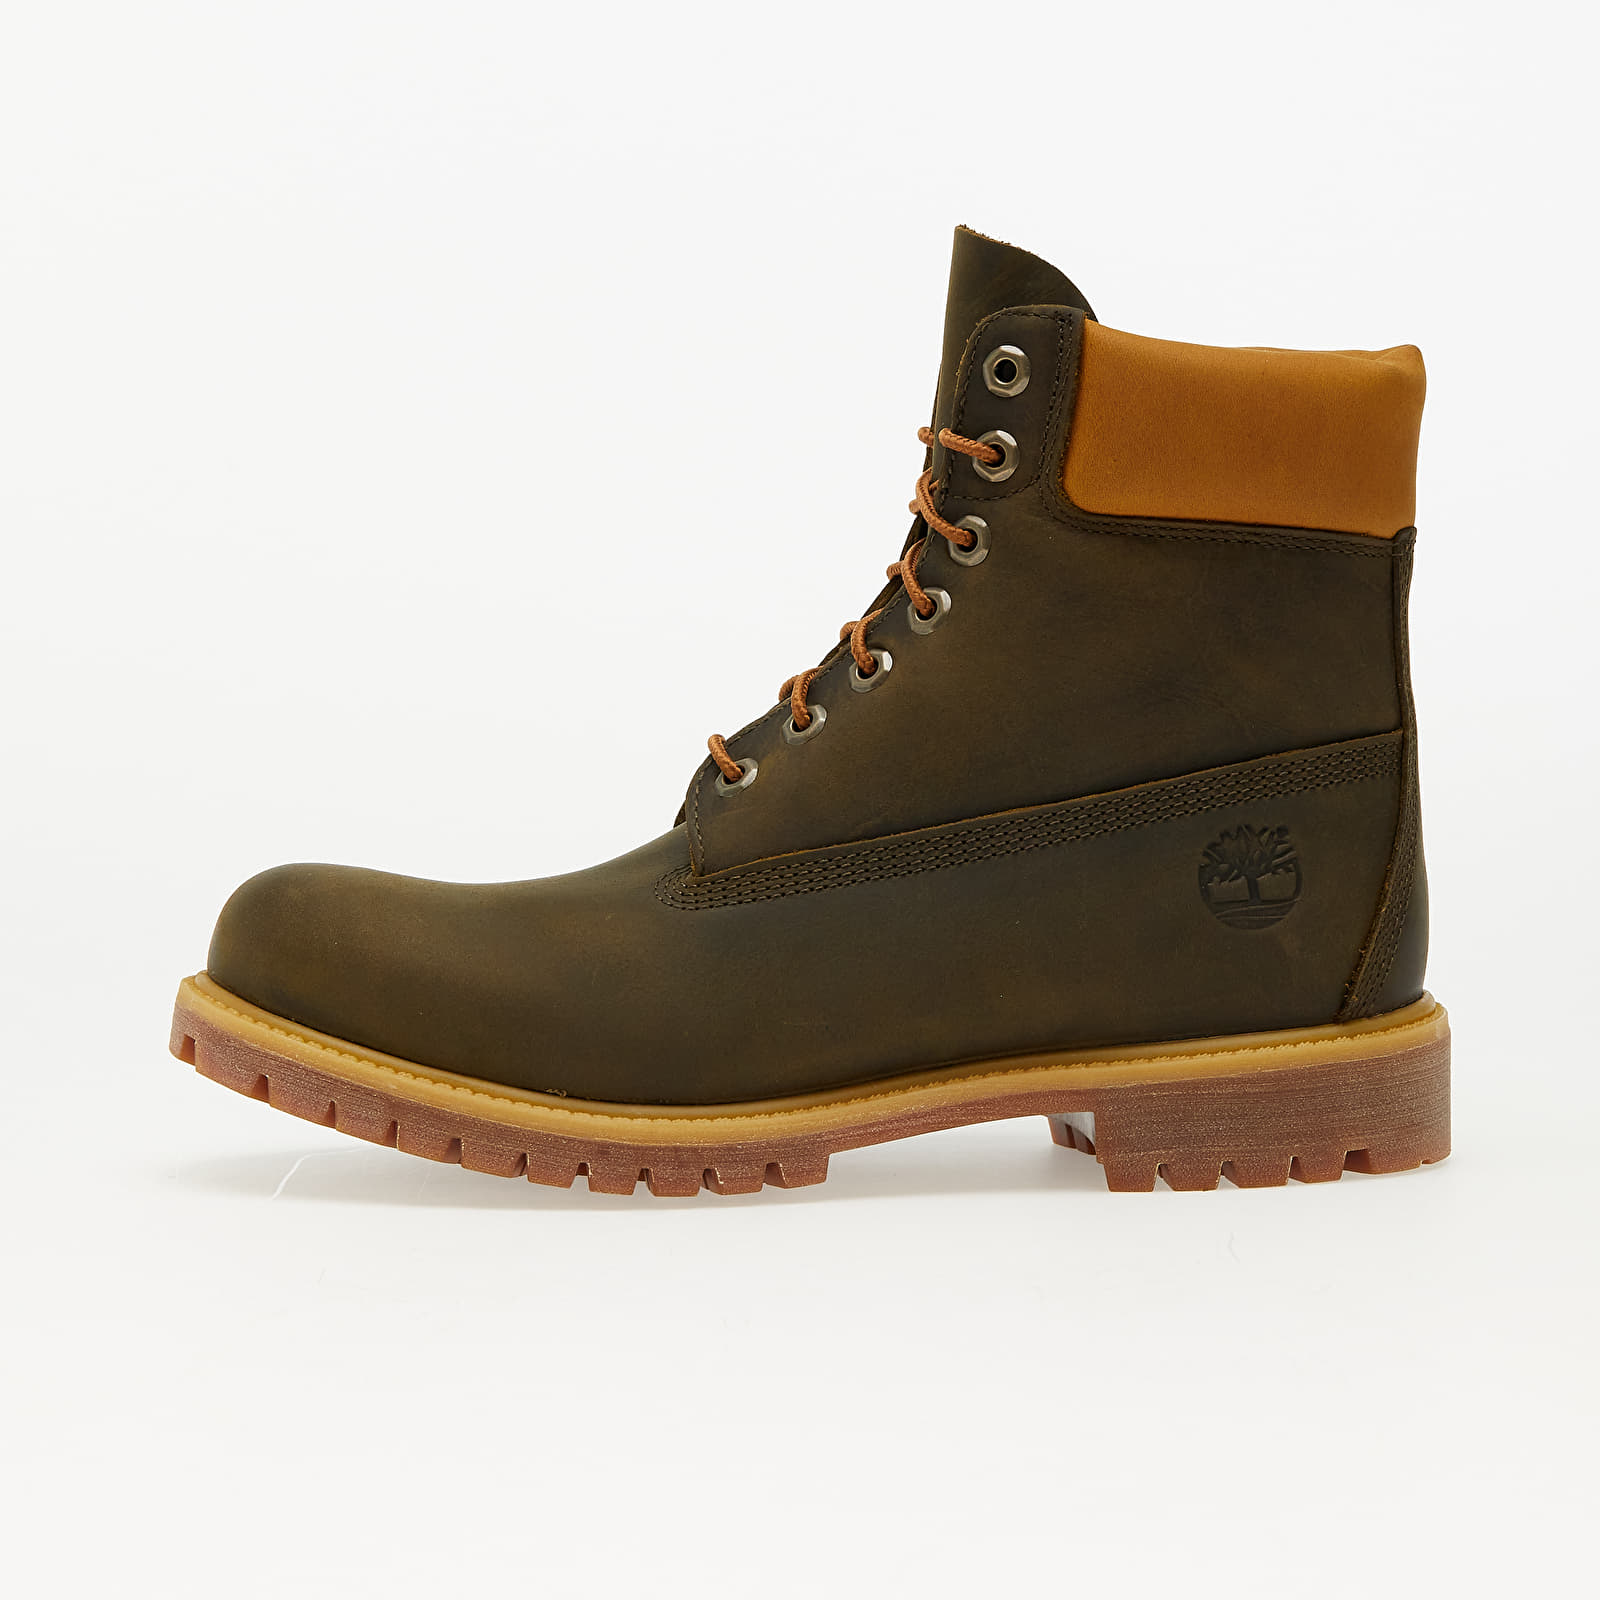 Timberland - 6 inch lace up waterproof boot olive